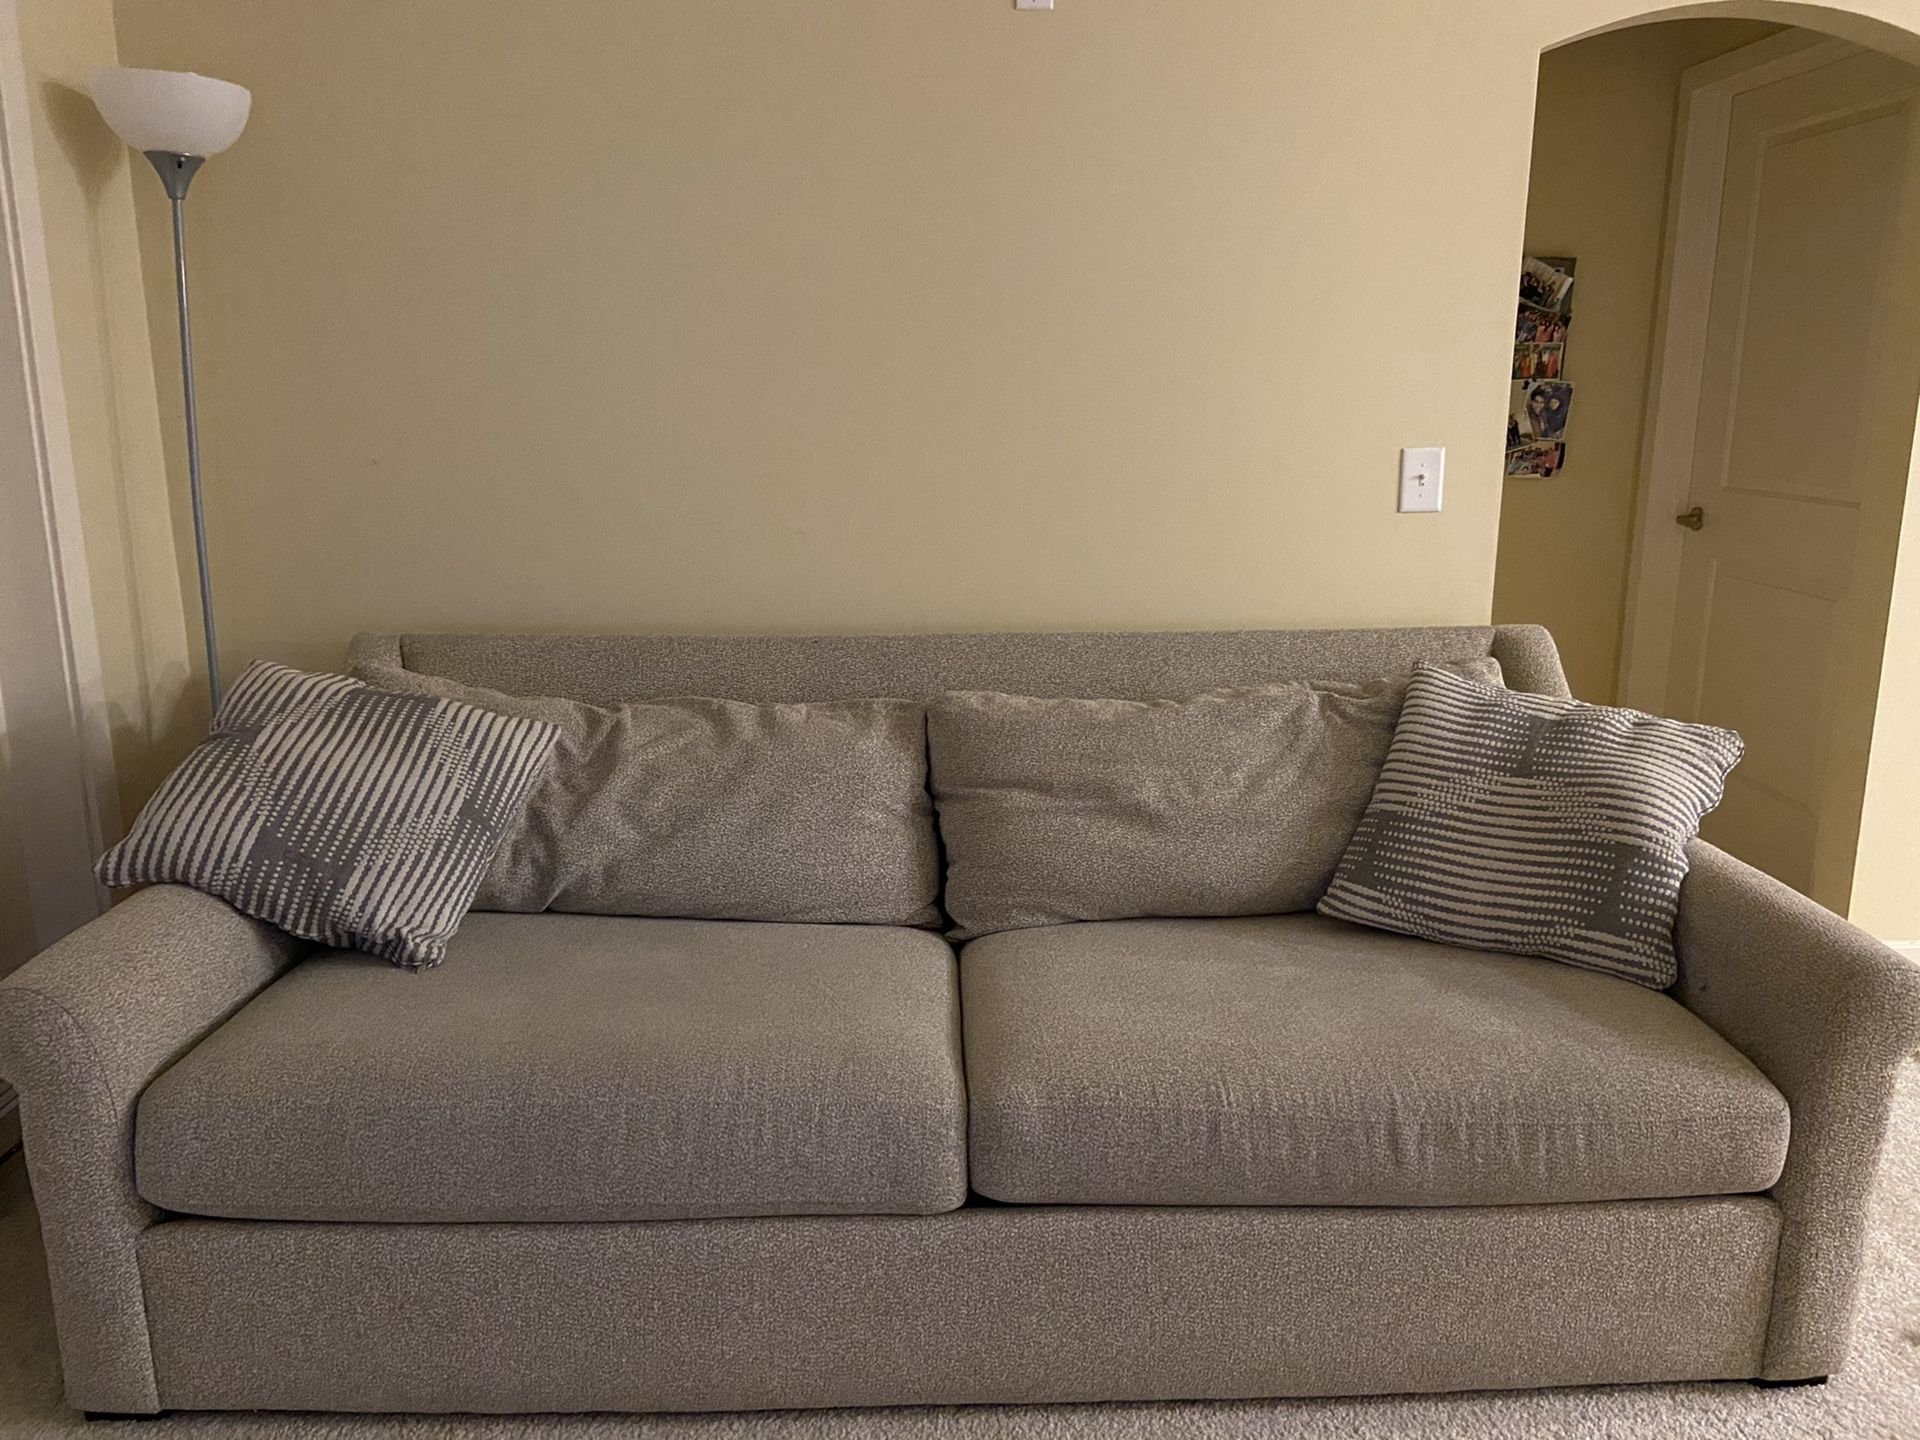 Comfortable couch with pillows